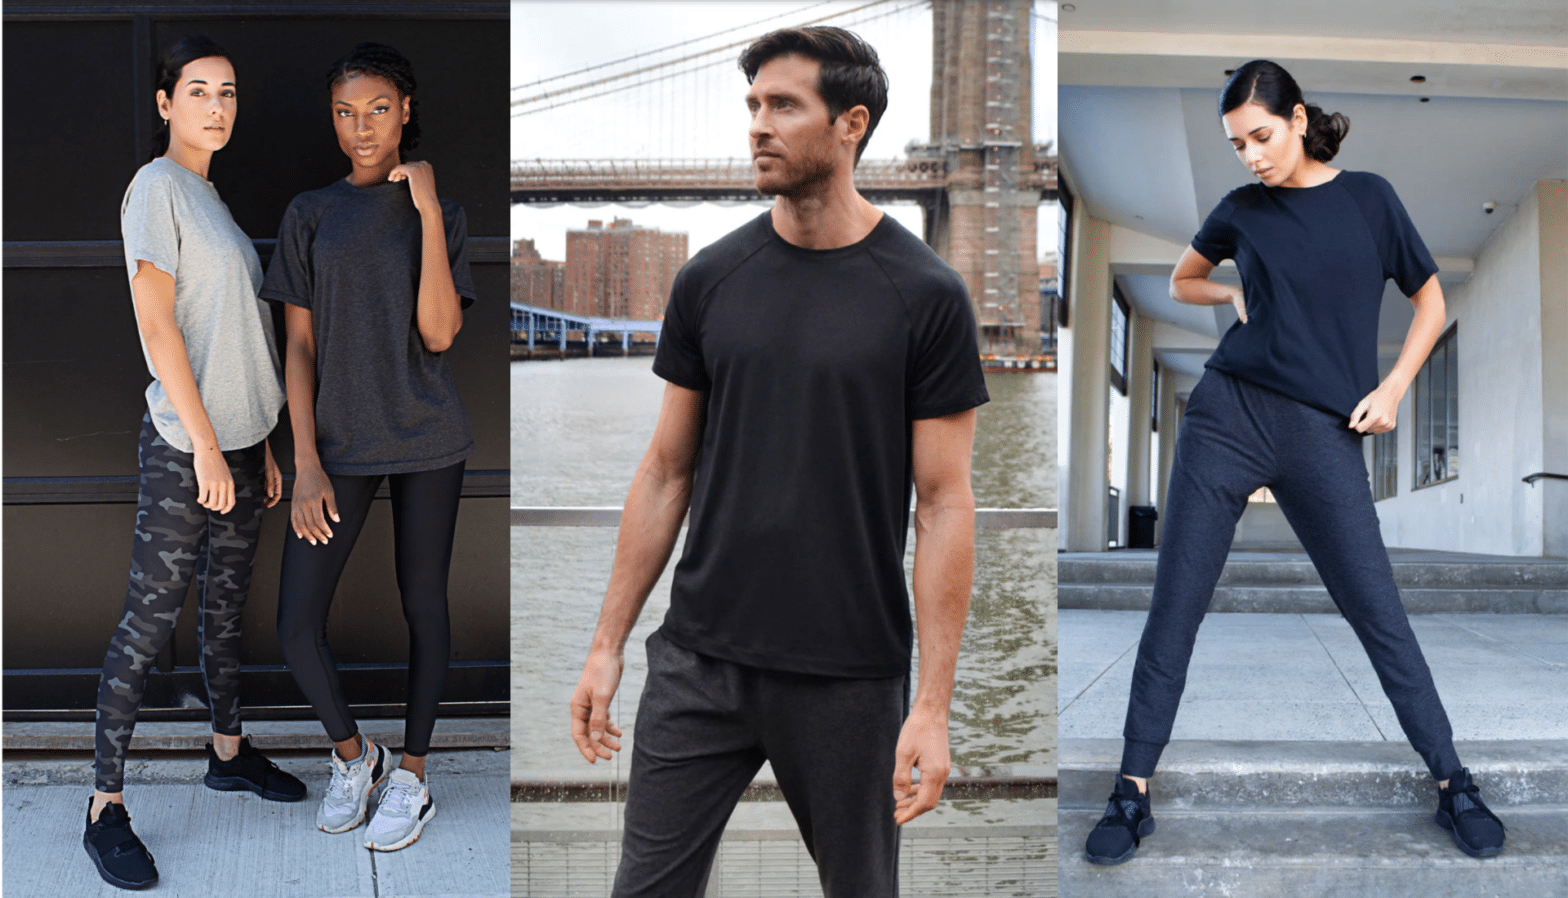 The most comfortable [athleisure] clothing in the world.